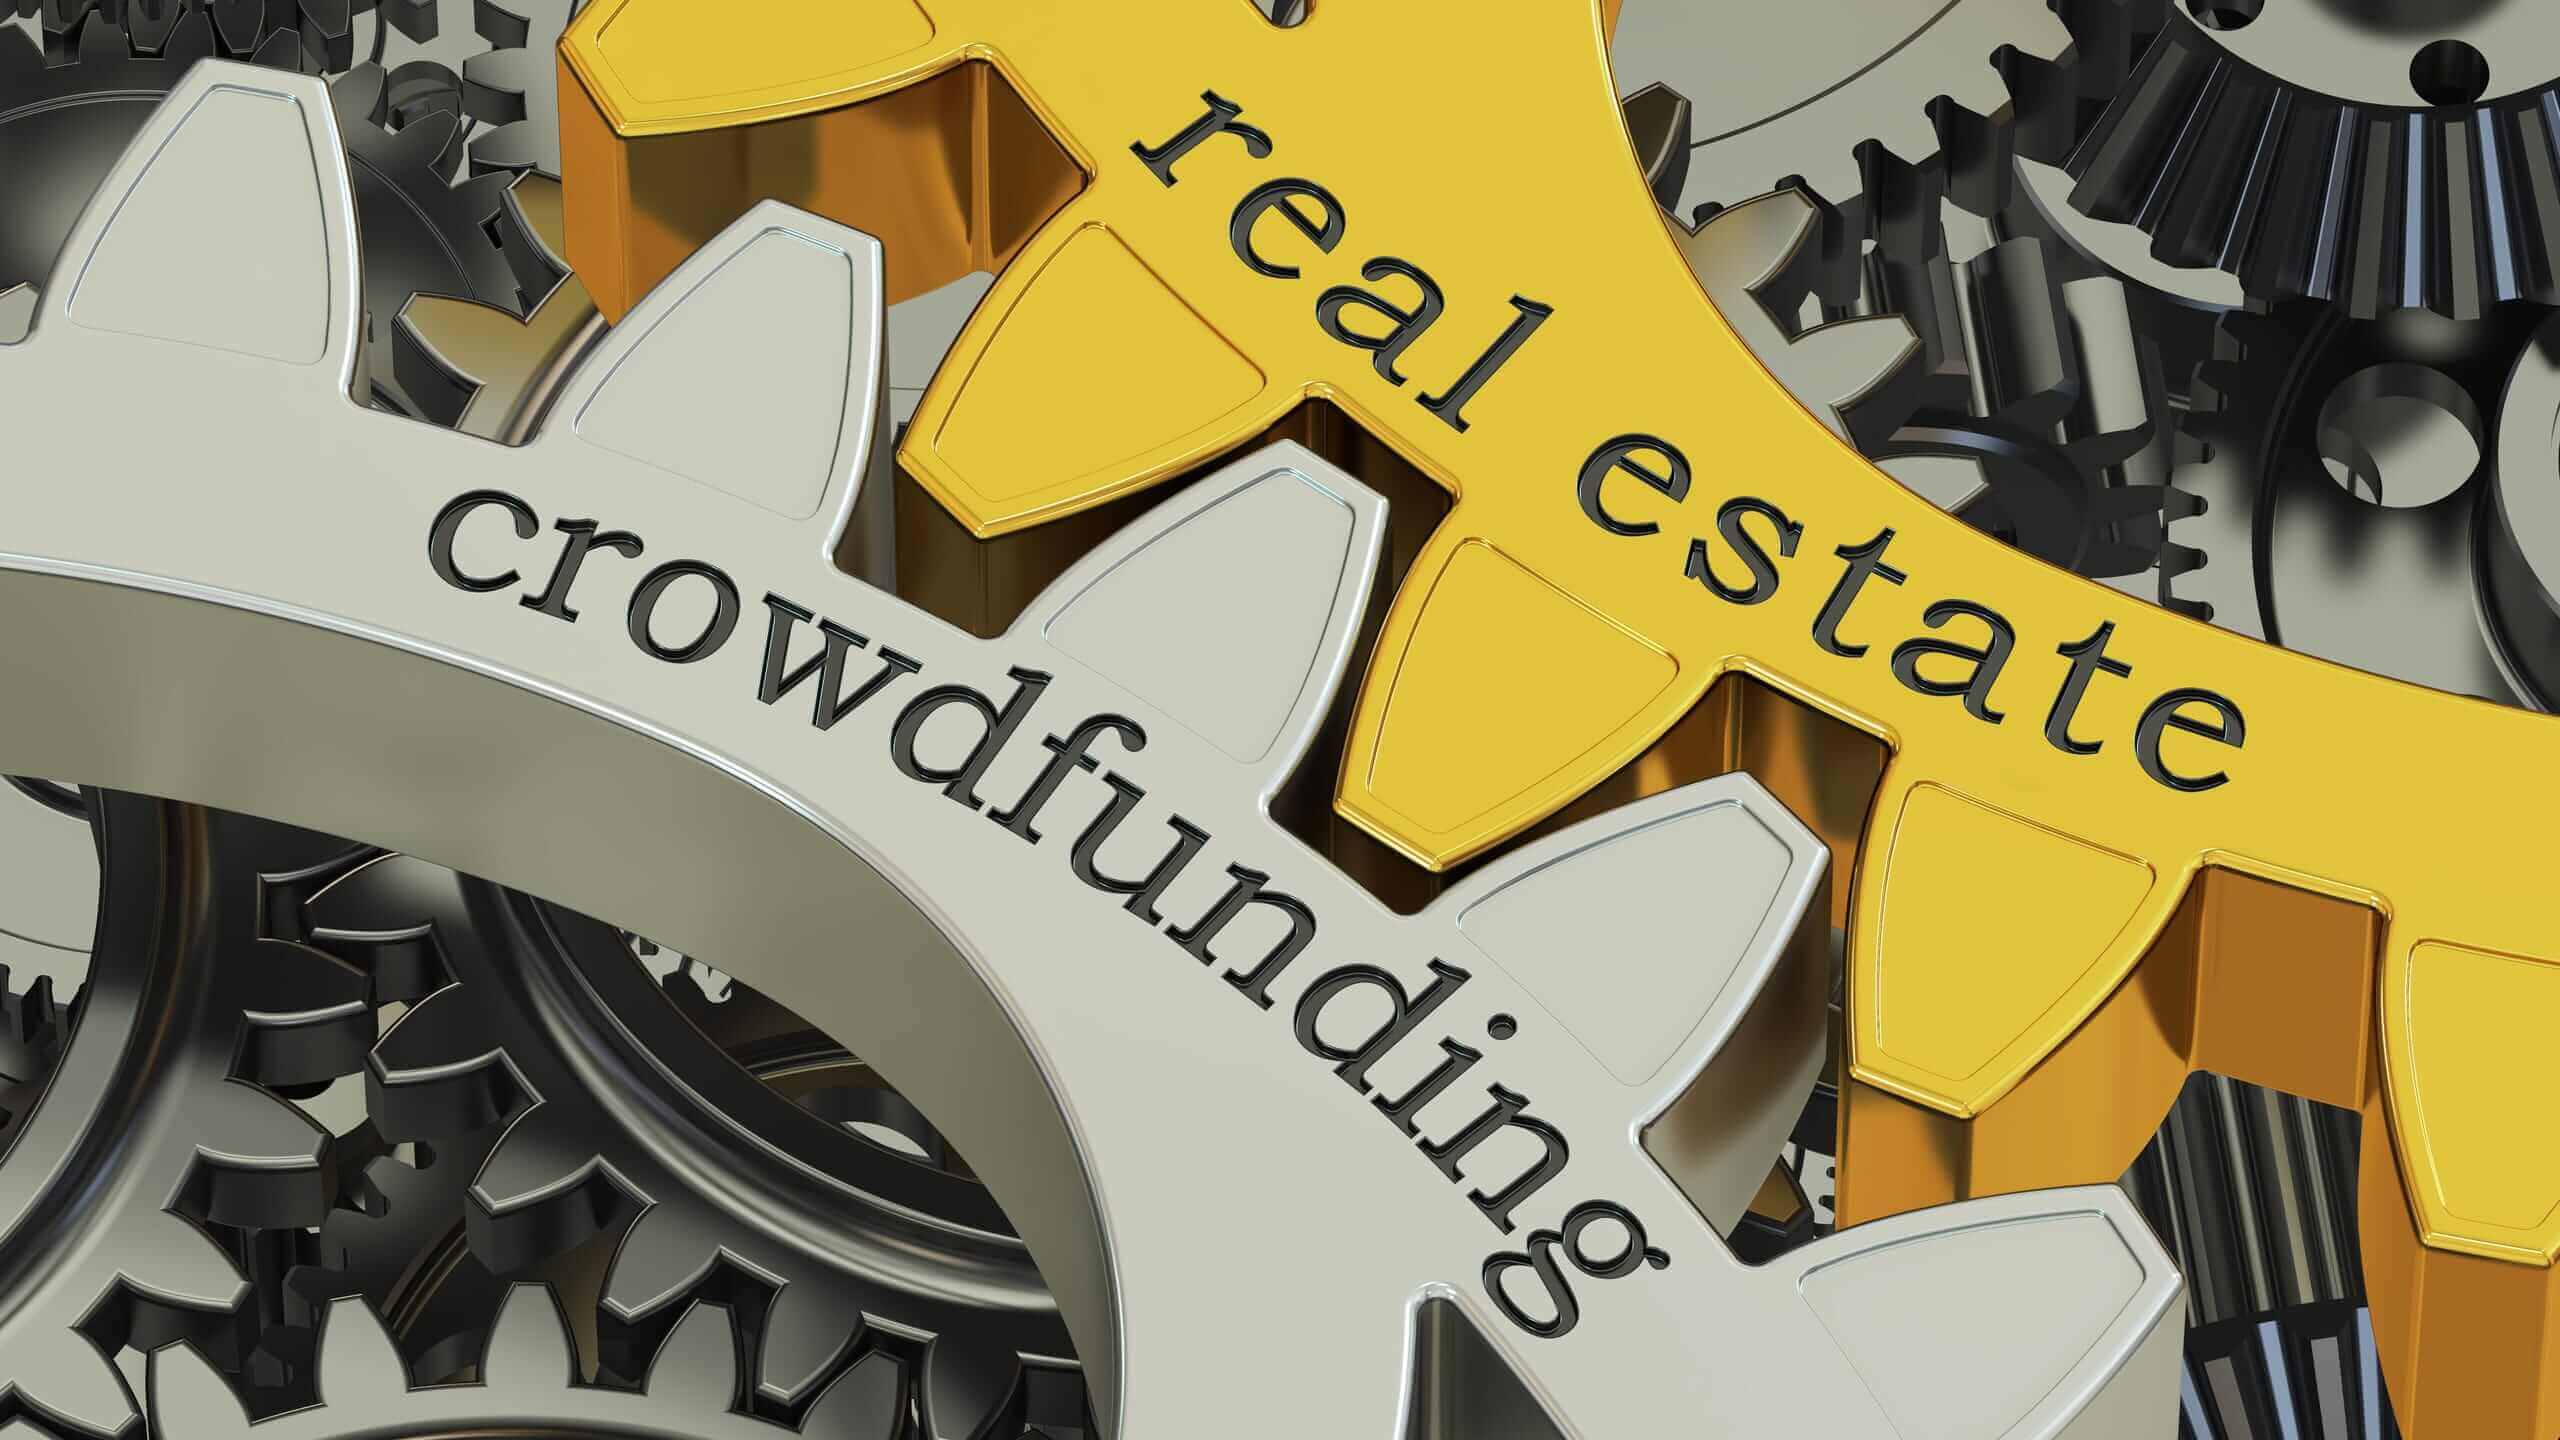 CROWDFUNDING IN REAL ESTATE